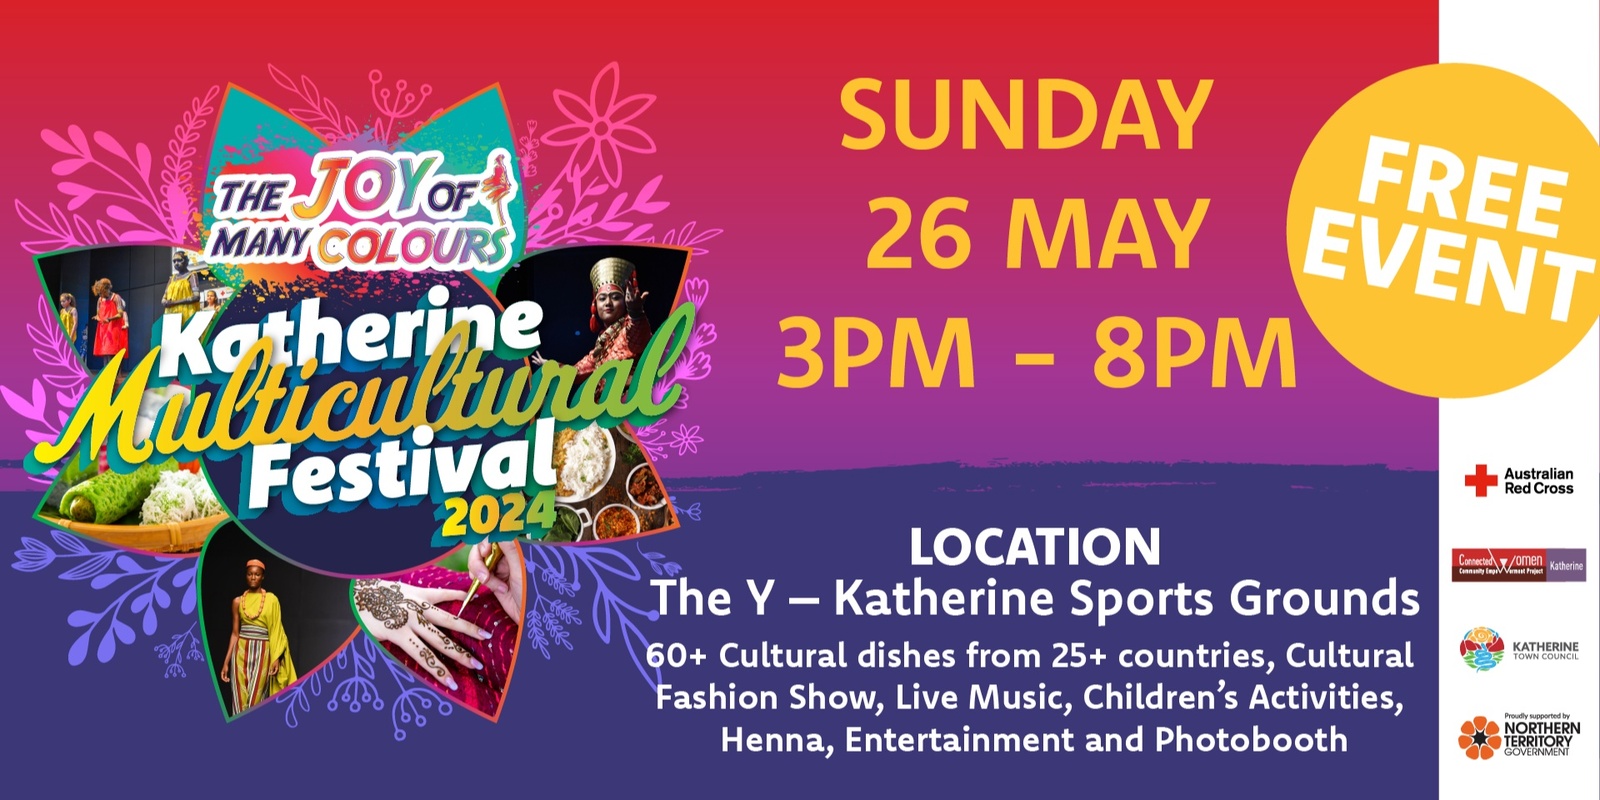 Banner image for The Joy of Many Colours -  Katherine Multicultural Festival 2024